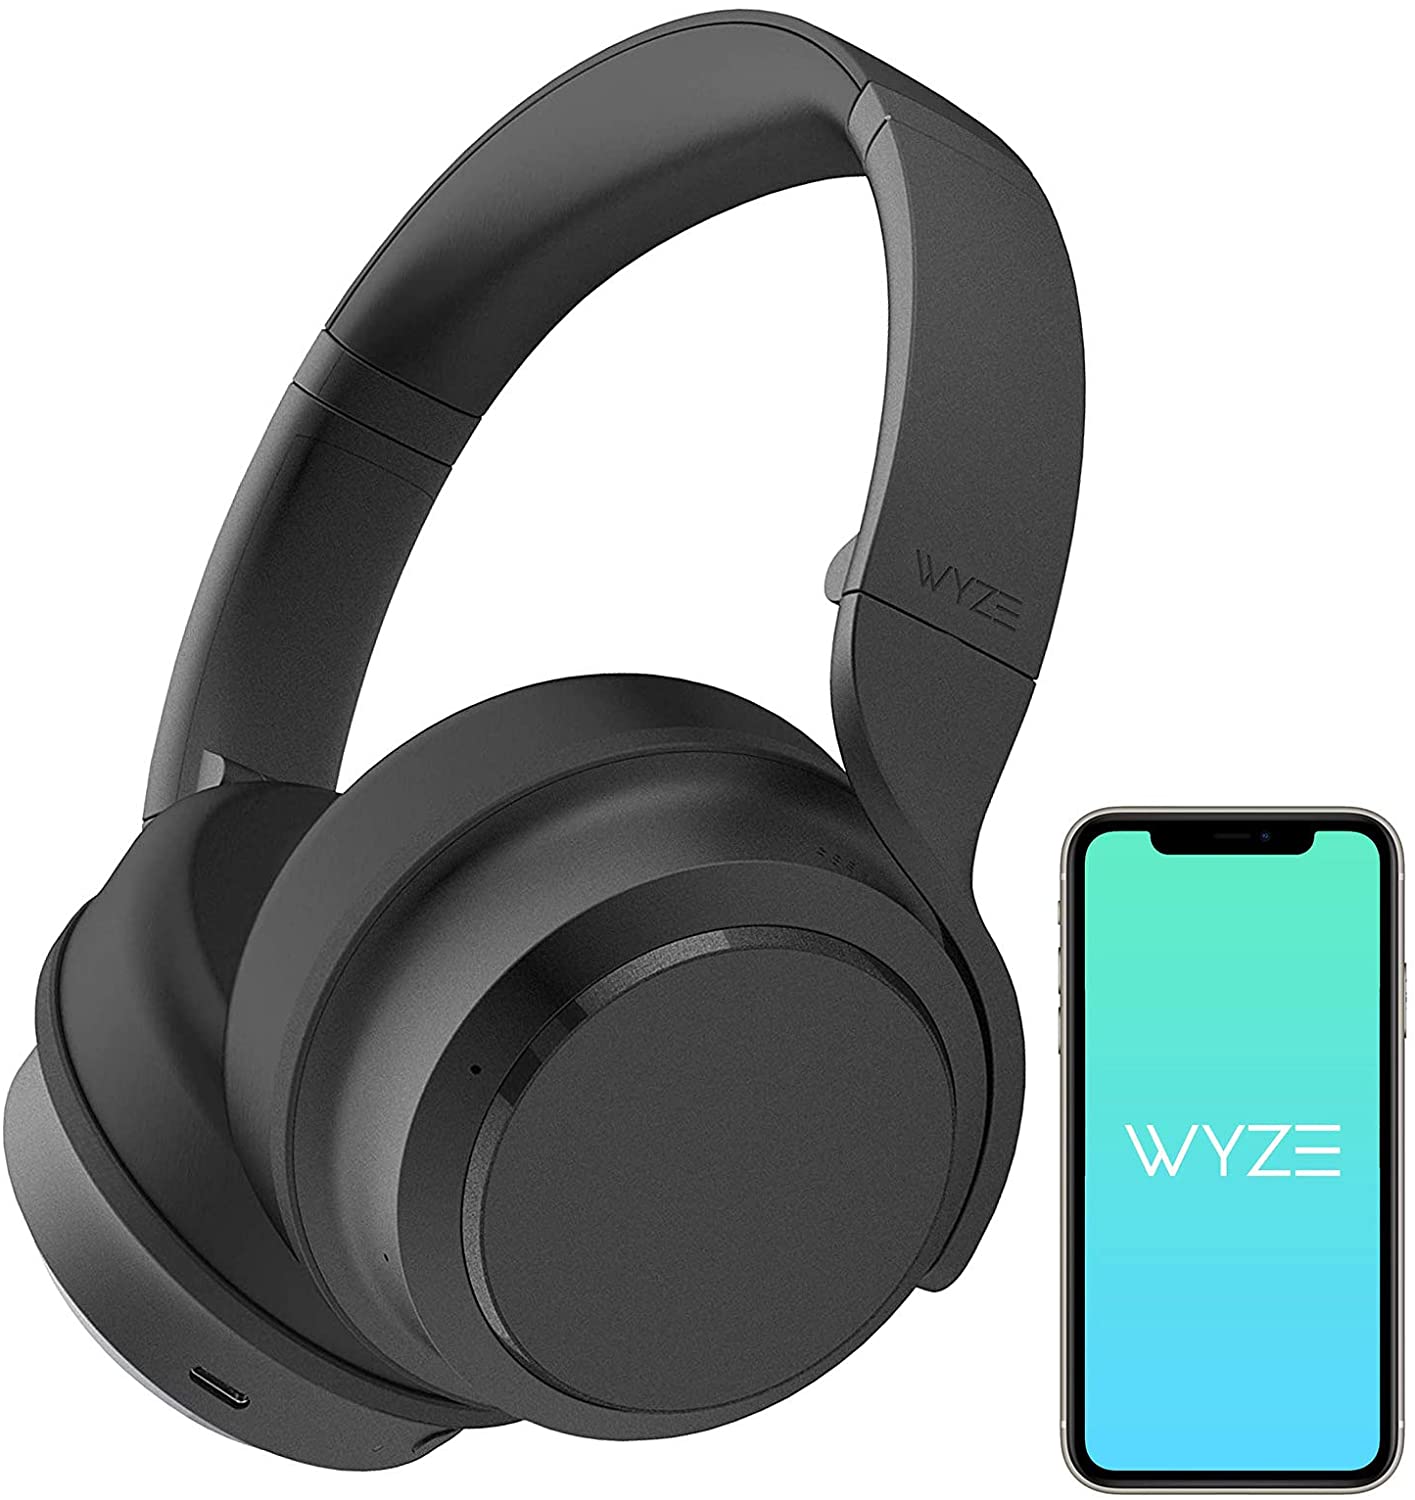 Depending on the version of Wyze Plug you have you may soon discover that  you can't pair old ones the usual way anymore. Instead you have to wait for  Bluetooth pairing to